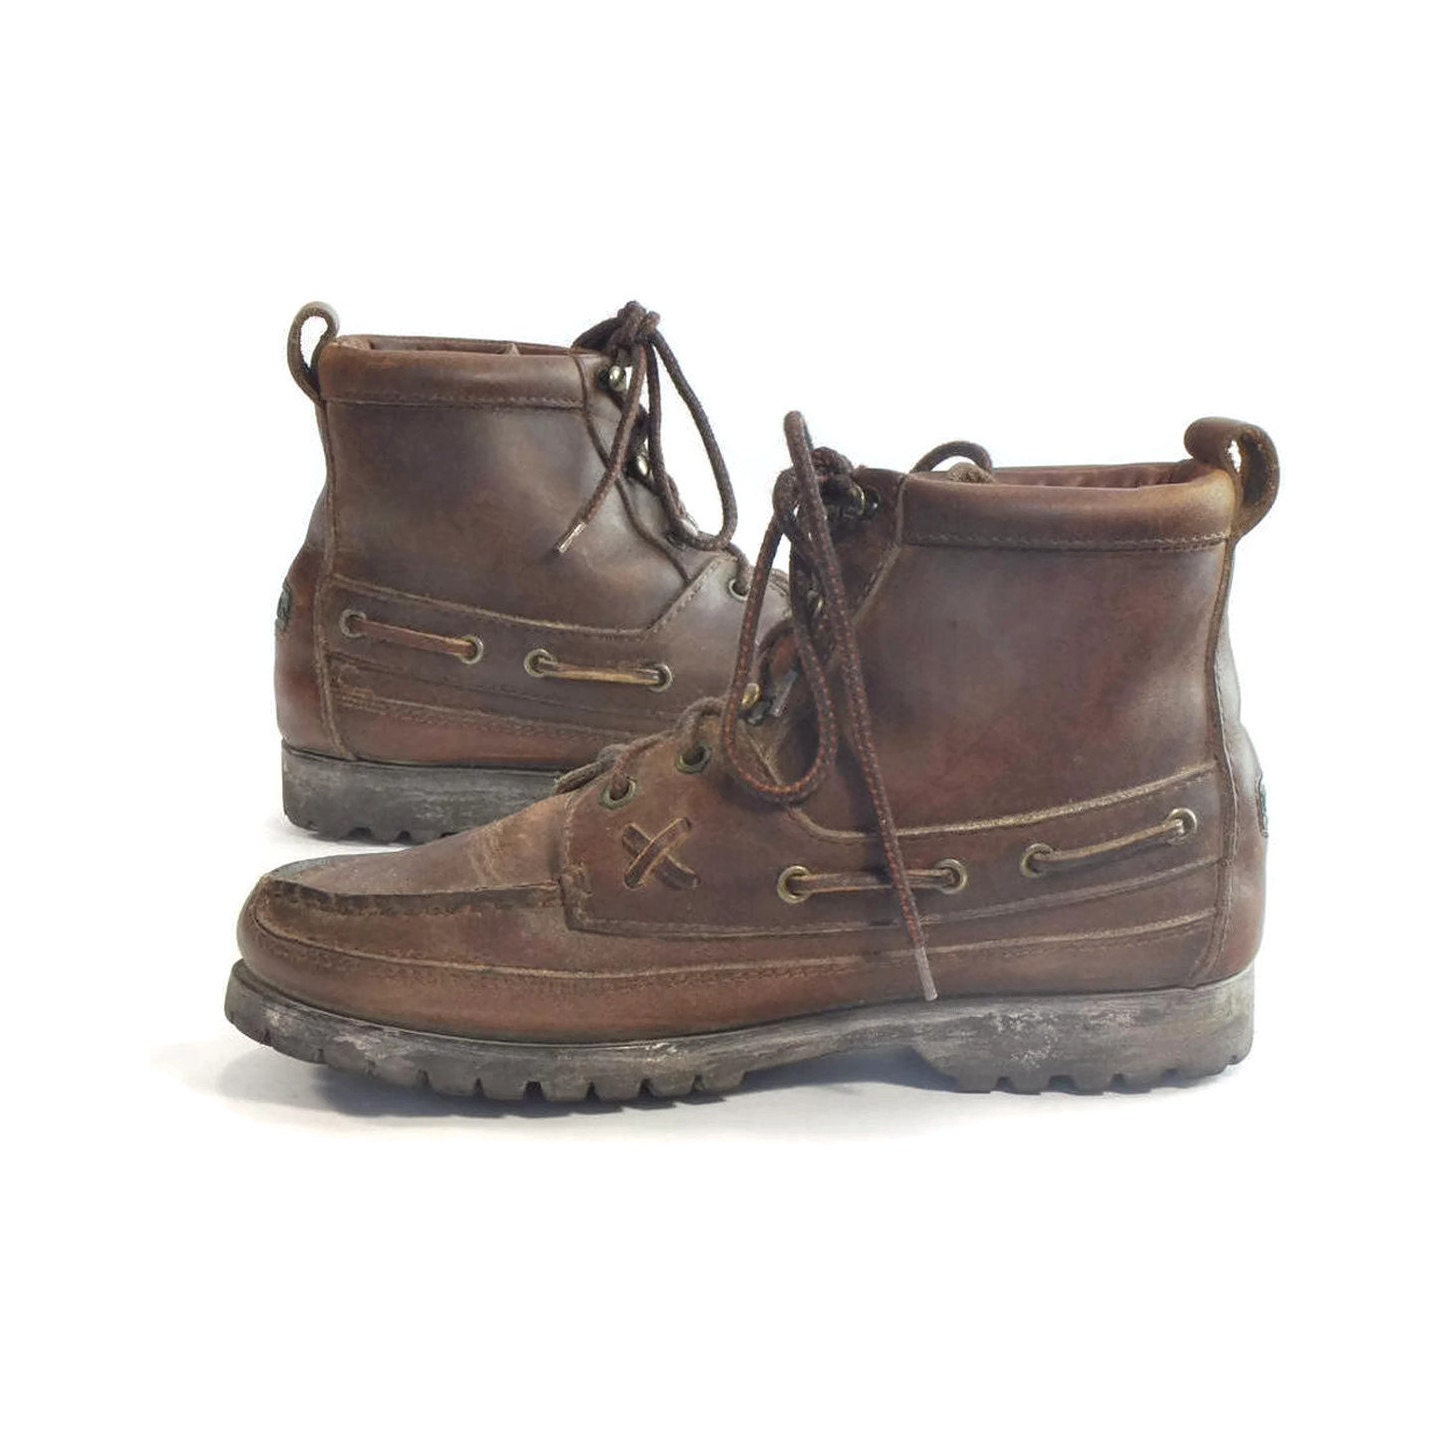 Vintage Hikers: Polo Country ankle boots. Ralph Lauren